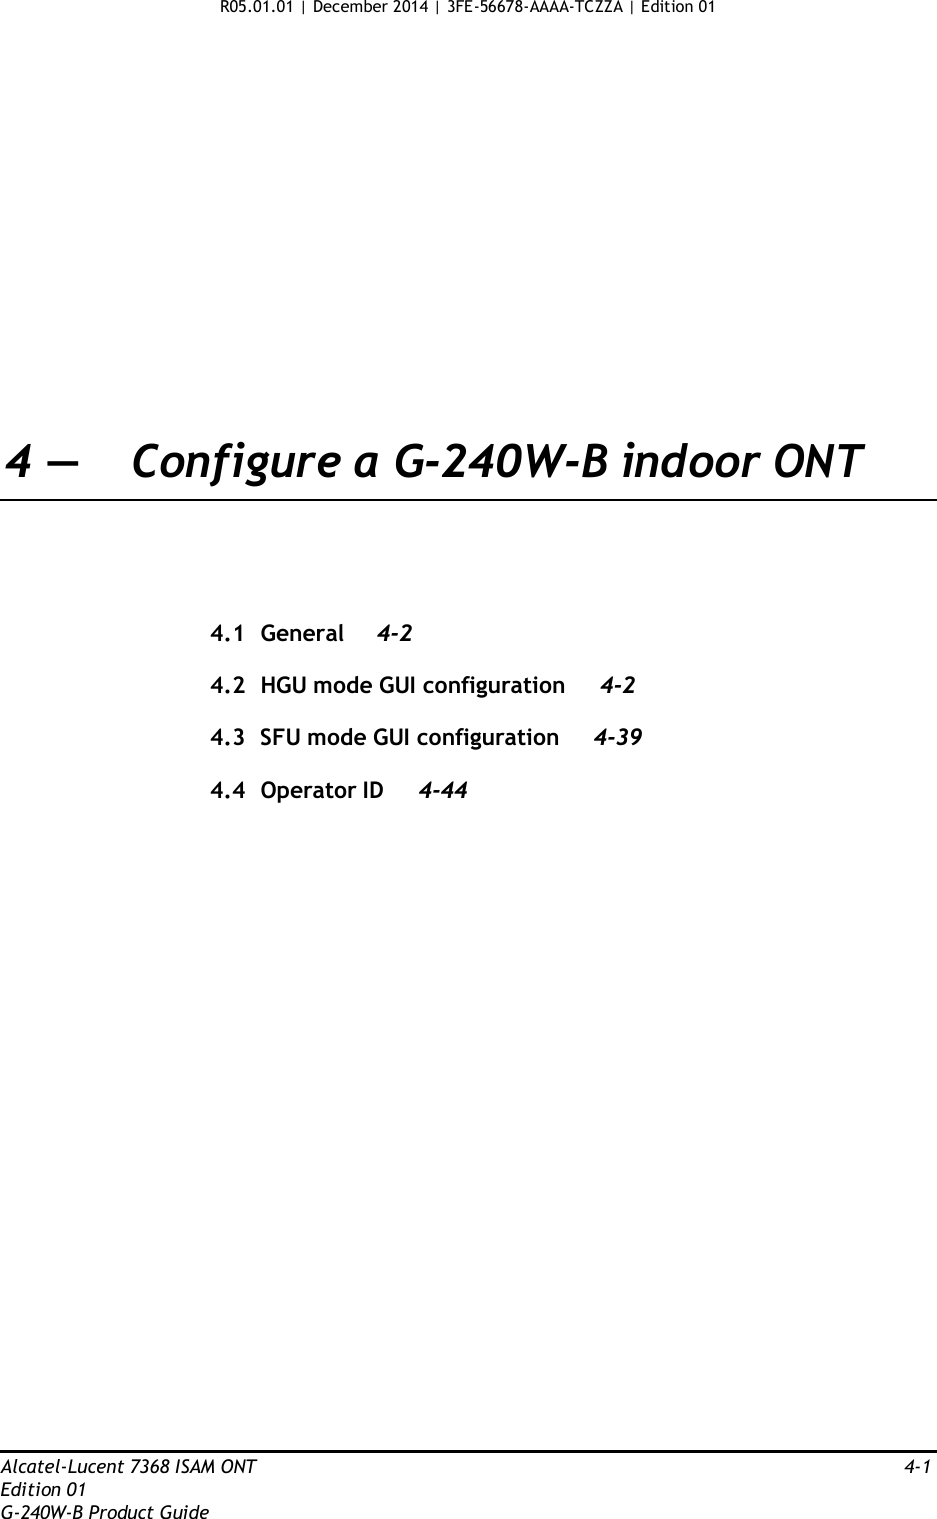 R05.01.01 | December 2014 | 3FE-56678-AAAA-TCZZA | Edition 01                      4 —  Configure a G-240W-B indoor ONT       4.1  General 4-2  4.2  HGU mode GUI configuration  4-2  4.3  SFU mode GUI configuration  4-39  4.4  Operator ID 4-44                                Alcatel-Lucent 7368 ISAM ONT  4-1 Edition 01 G-240W-B Product Guide 